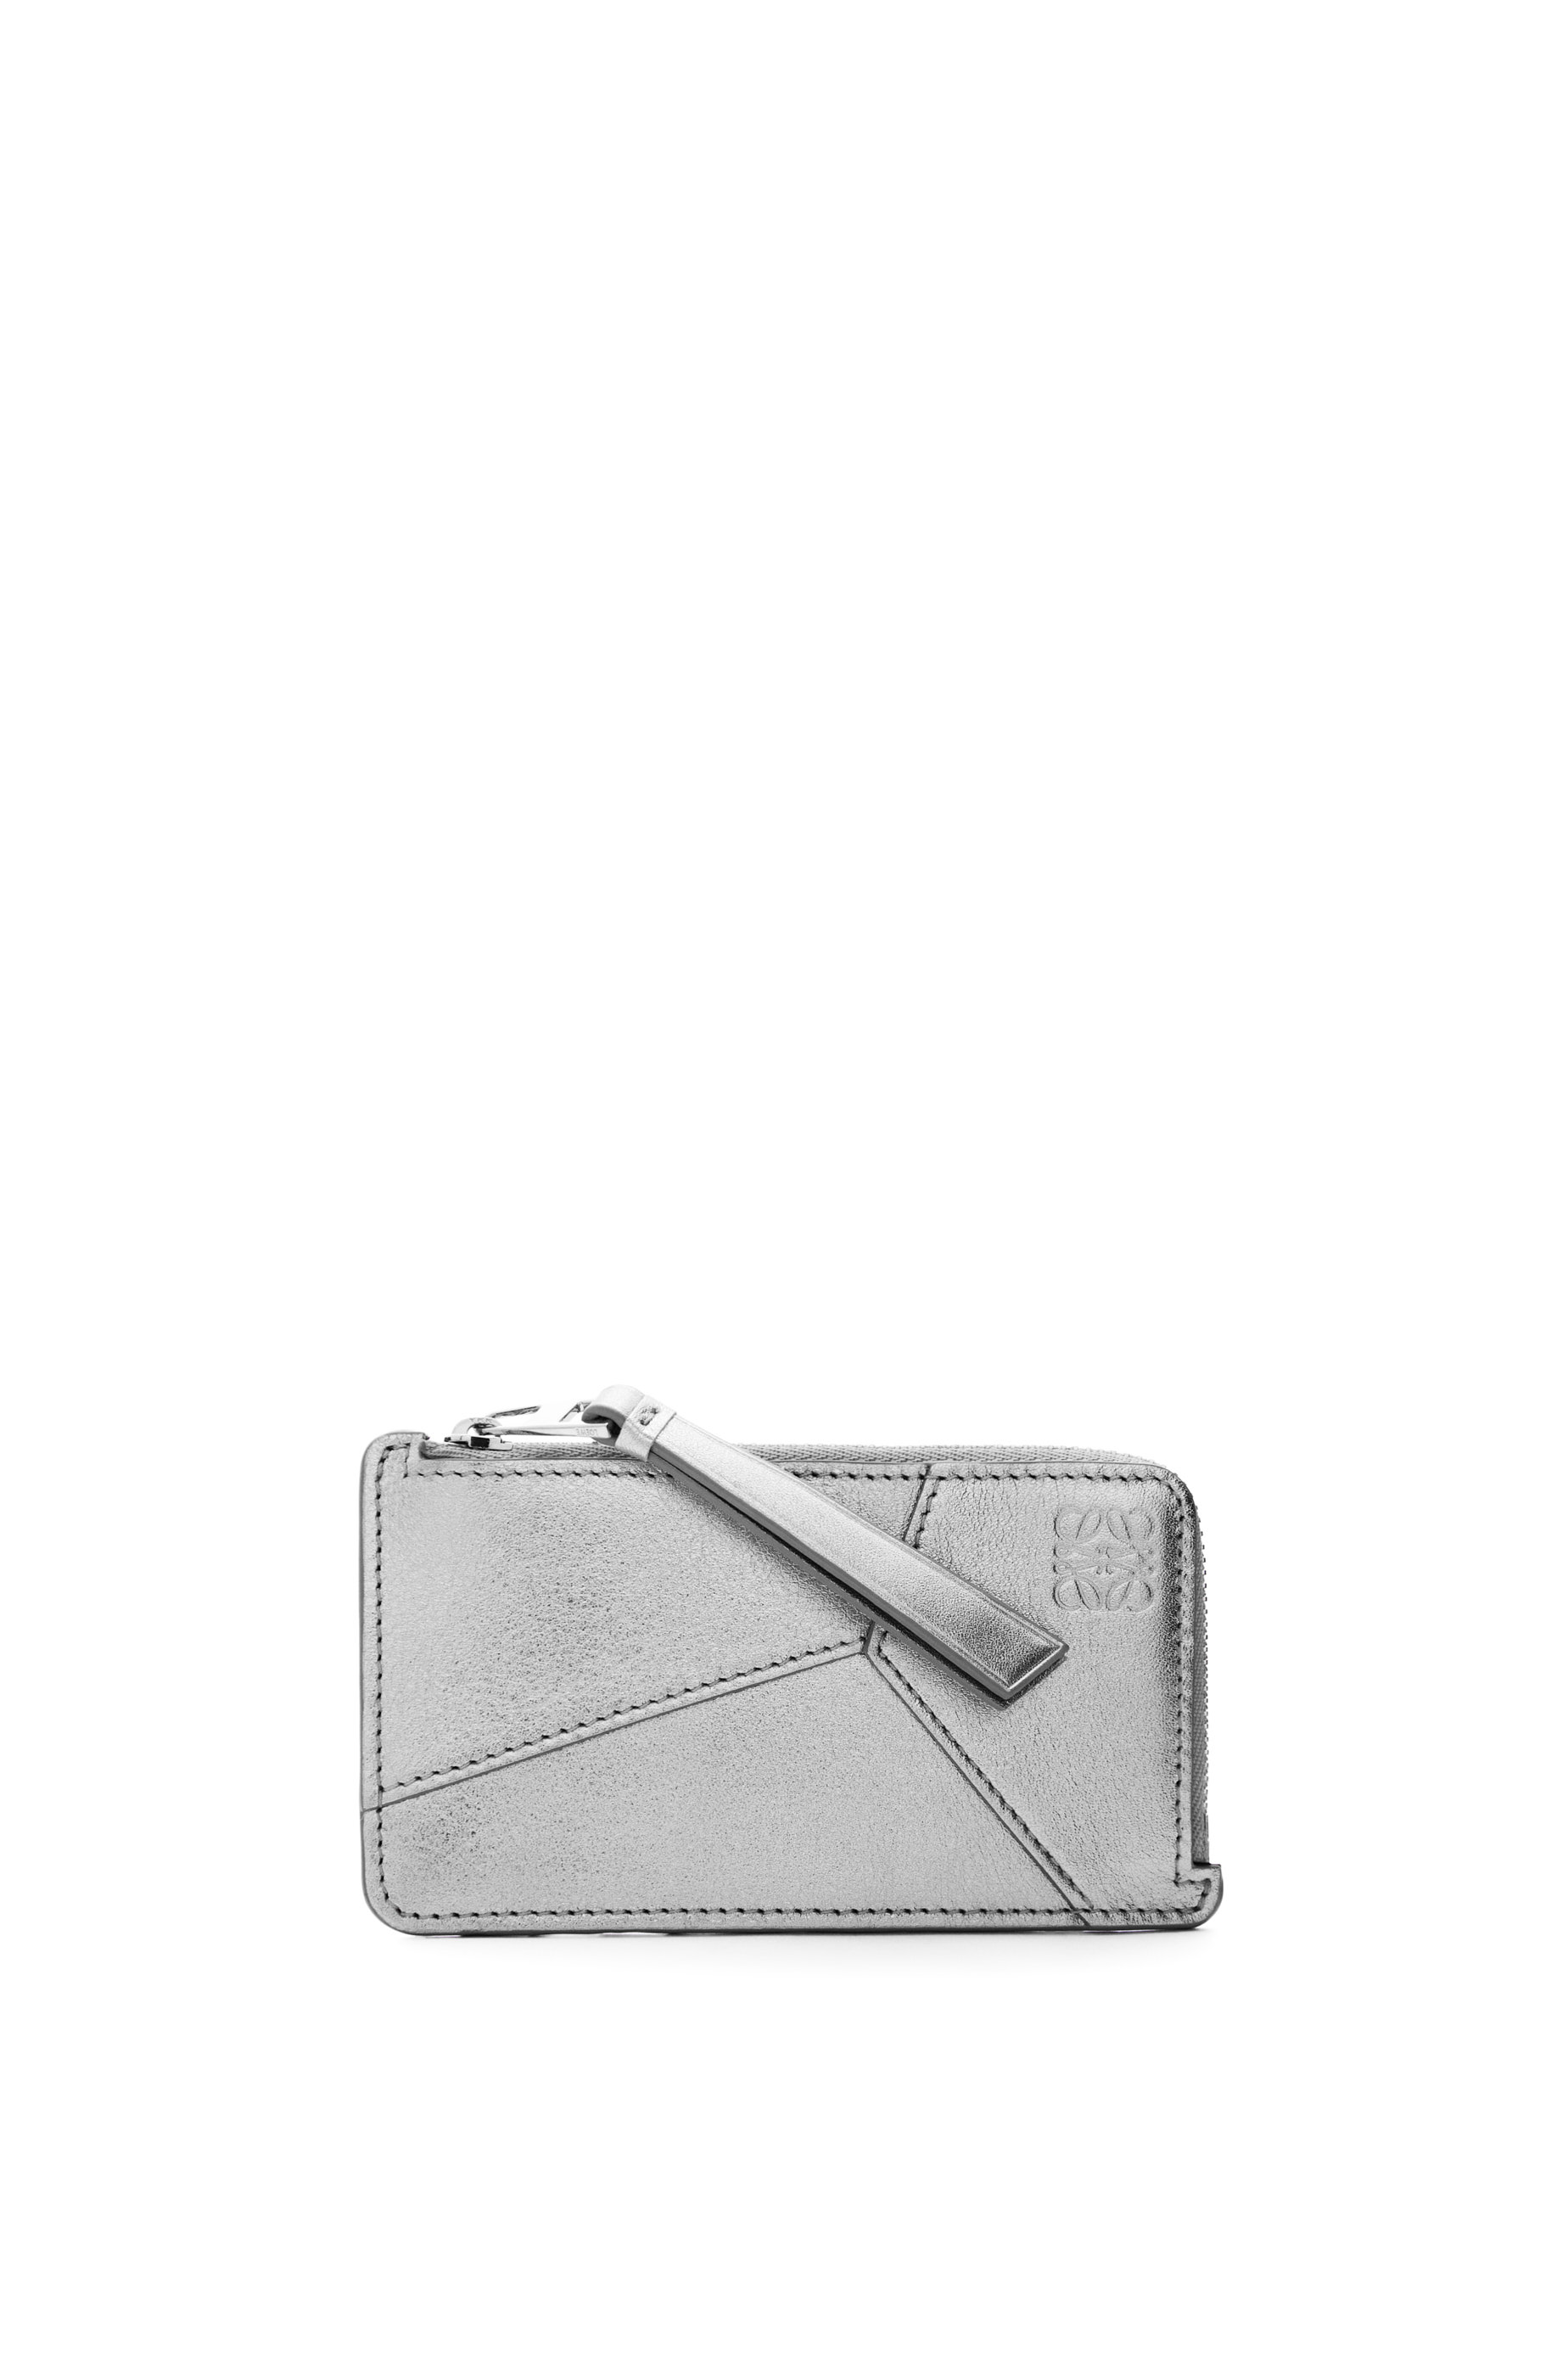 Luxury card cases & coin purses for women - LOEWE